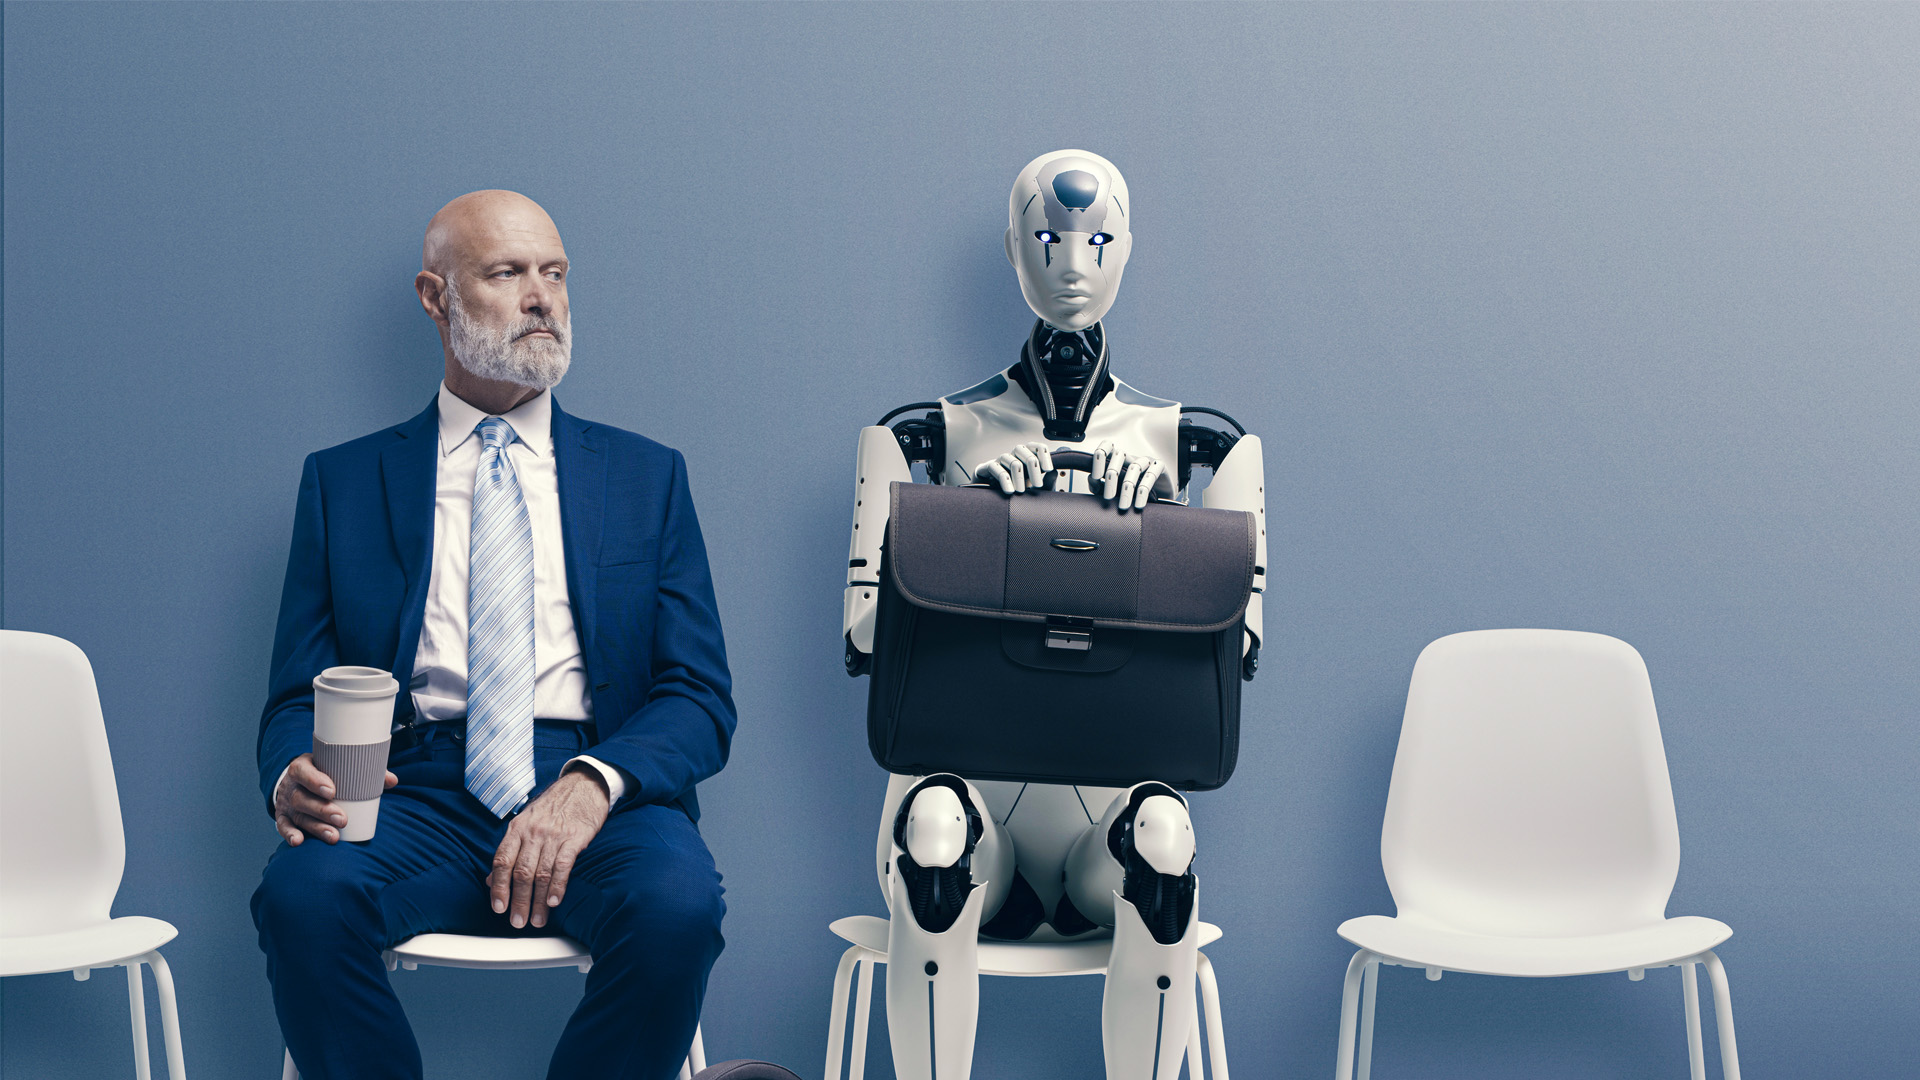 Man in suit waiting for interview next to AI humanoid